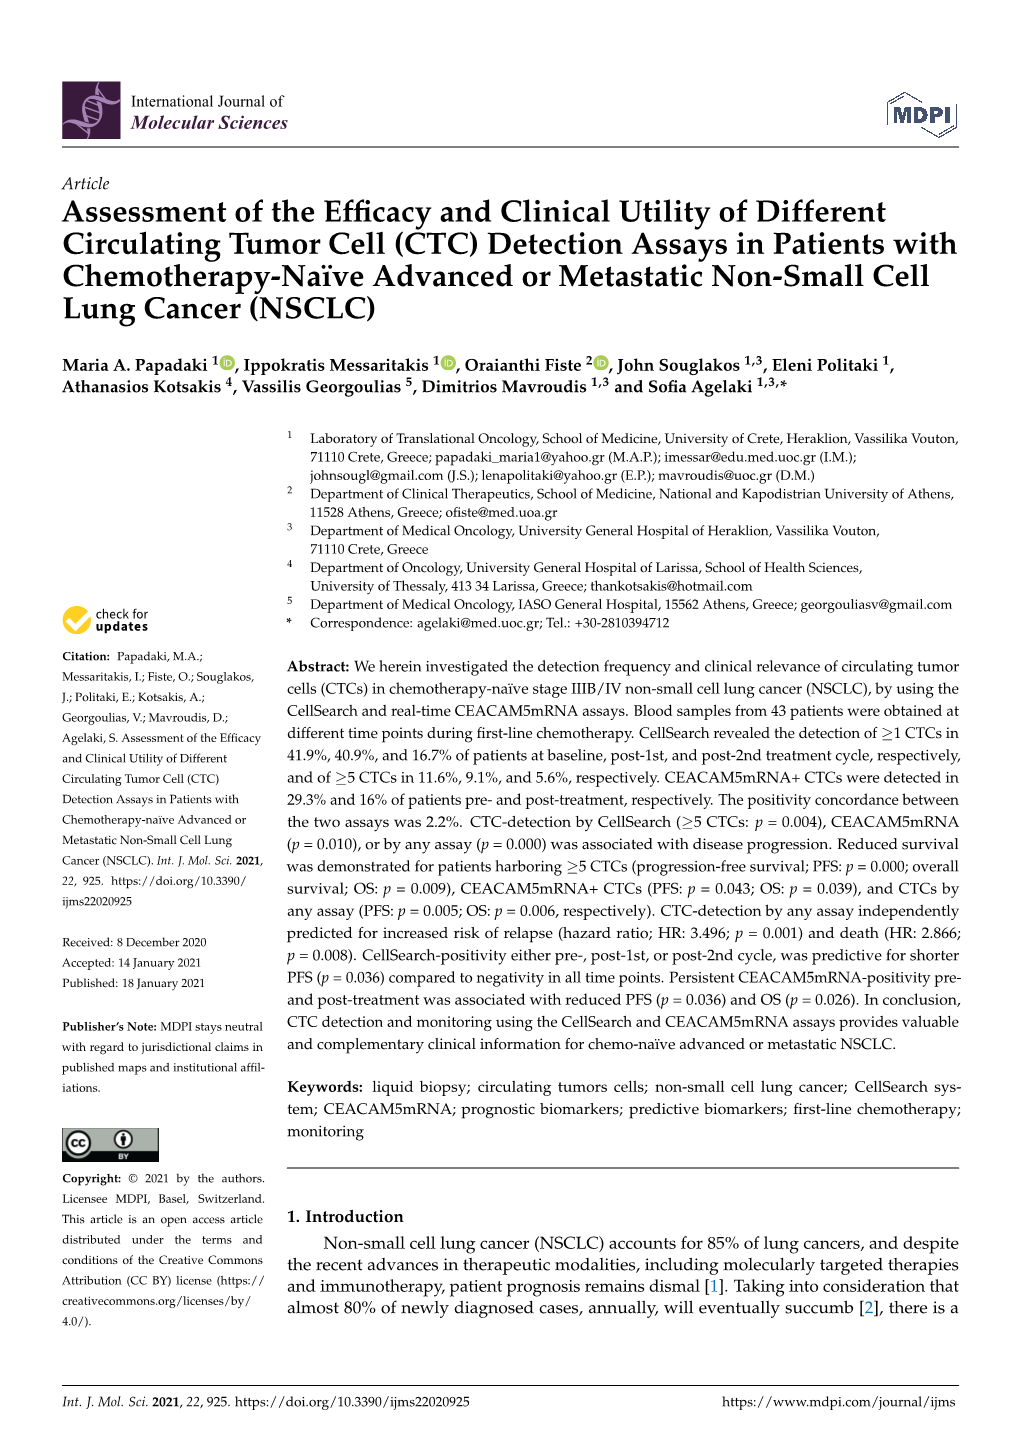 CTC) Detection Assays in Patients with Chemotherapy-Naïve Advanced Or Metastatic Non-Small Cell Lung Cancer (NSCLC